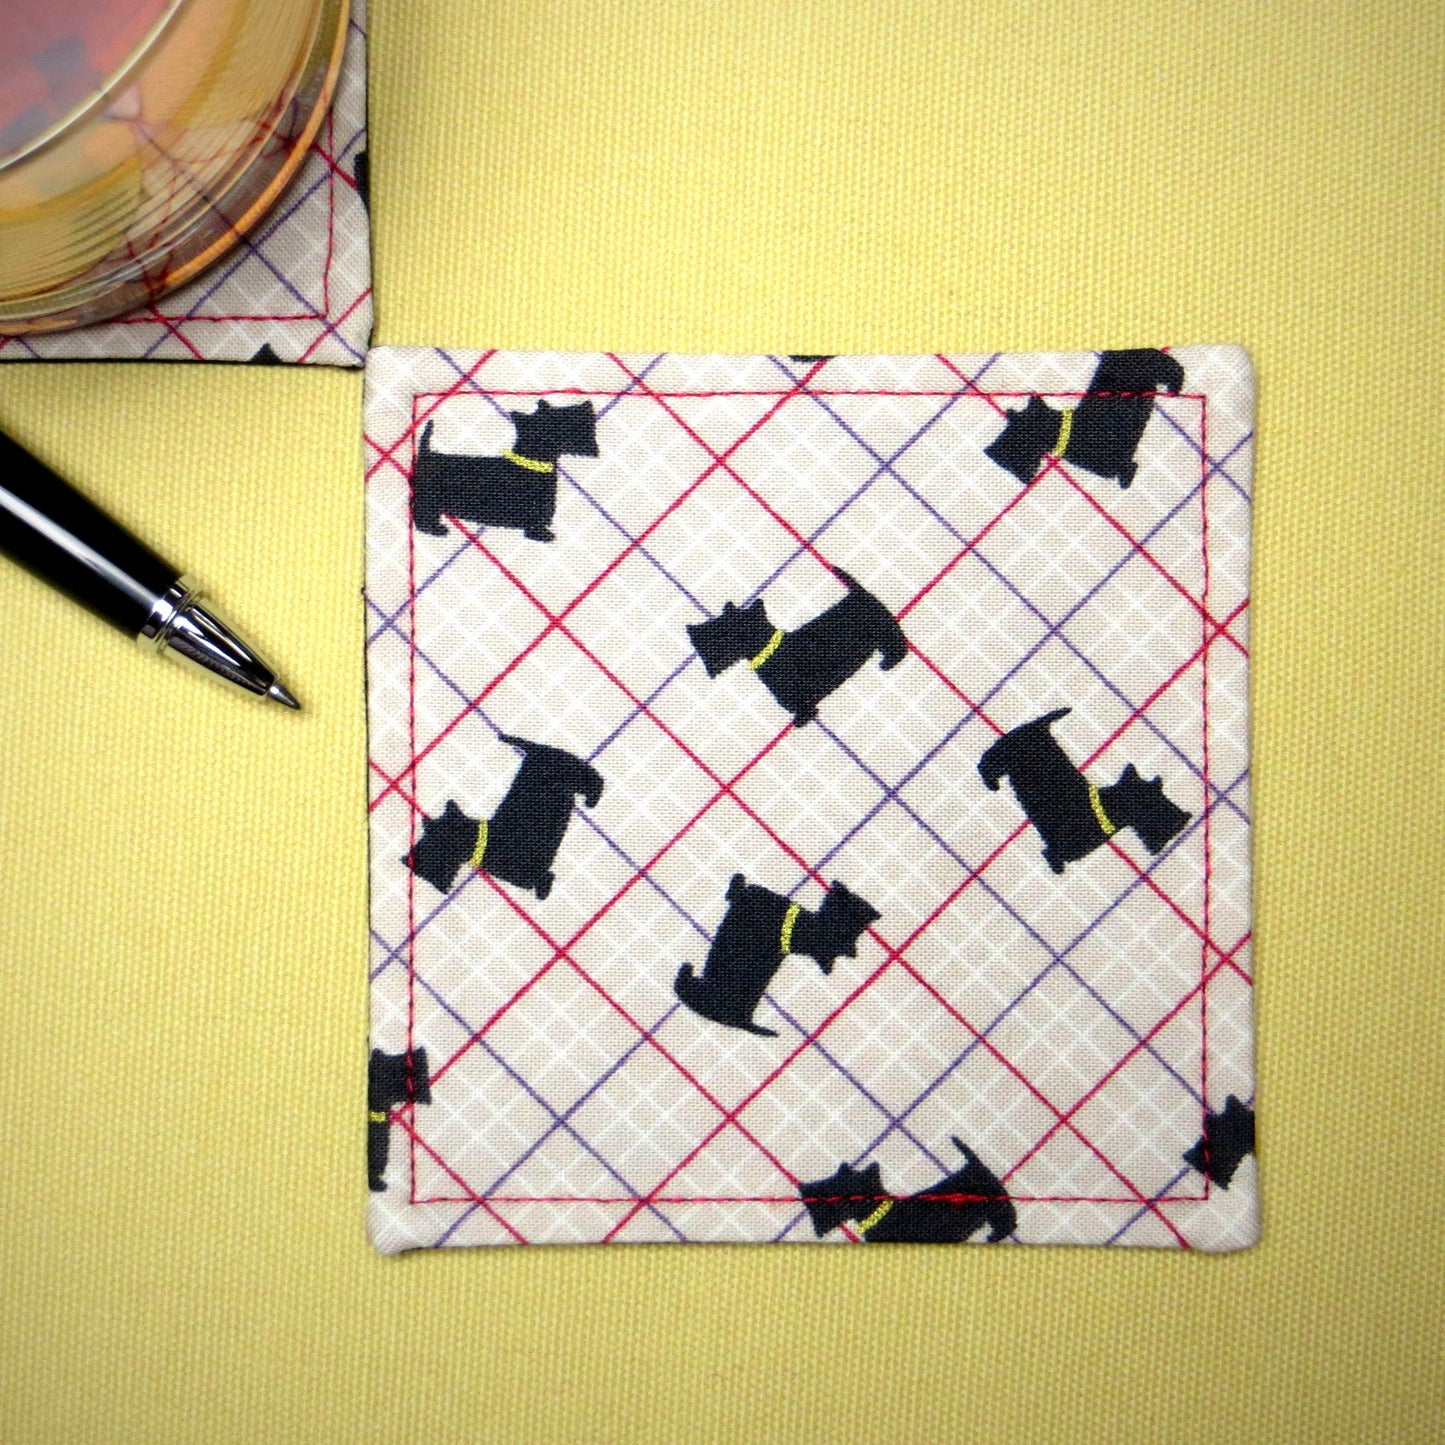 Square coasters with Scottish Terrier dogs design on beige background with red, purple, and white grid